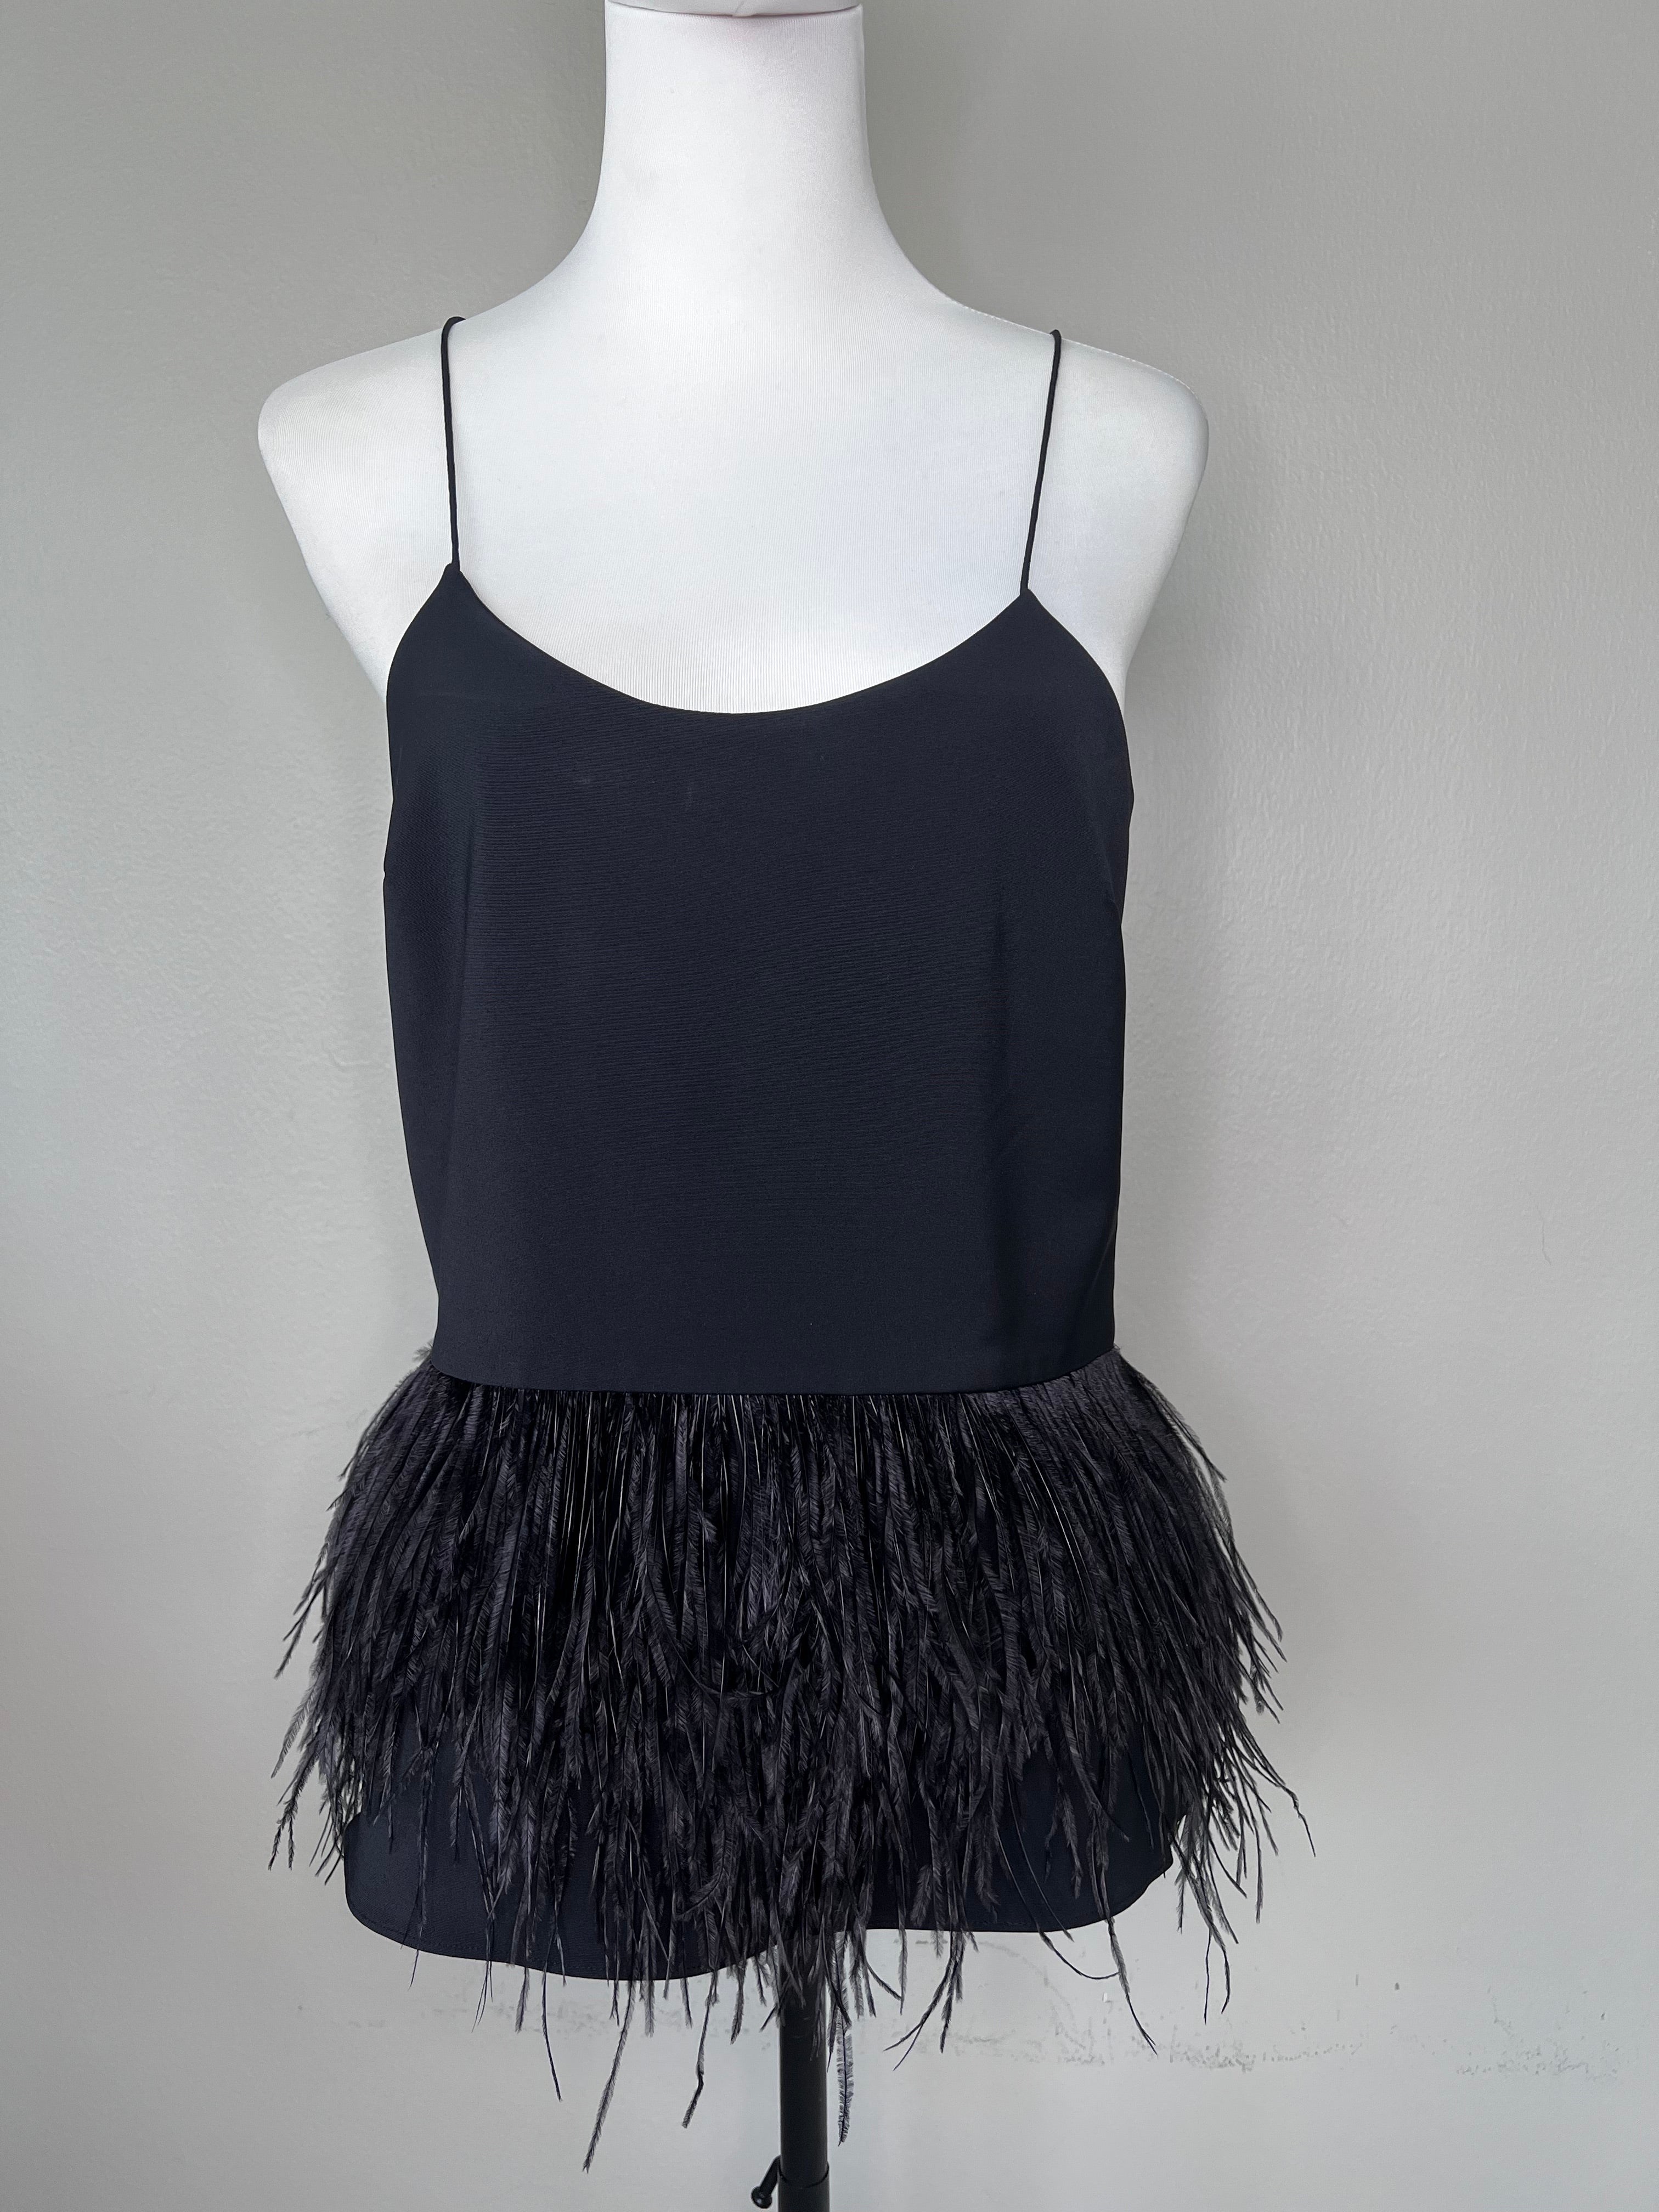 Black peplum top with feather details - TIBI